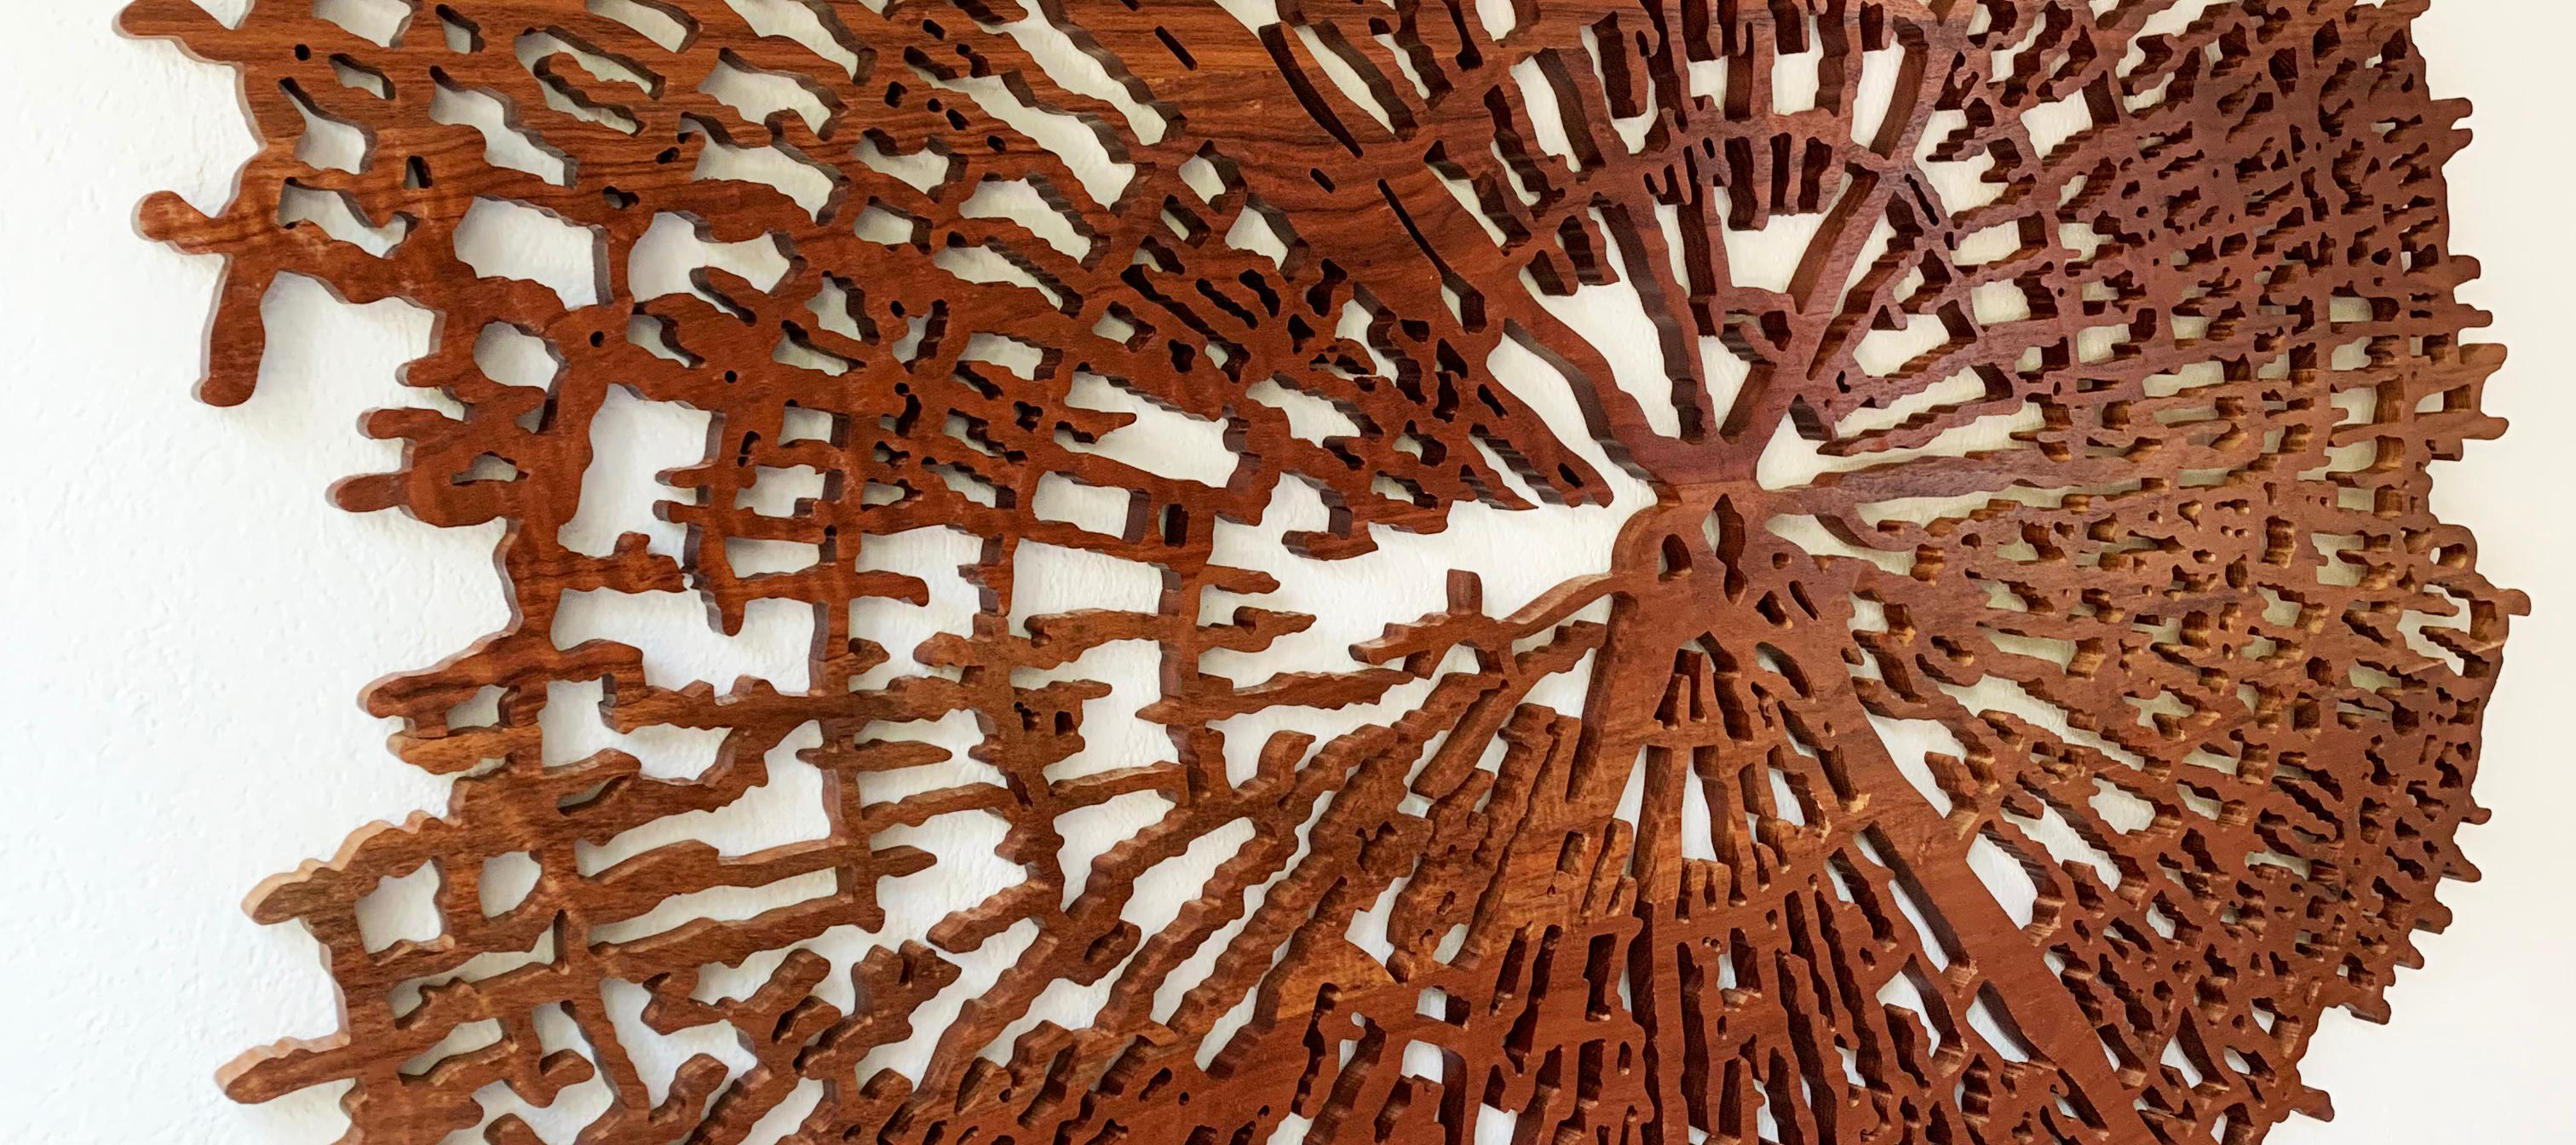 Dendrocronology is made with tropical solid wooden pieces with a varnish finish. Its details and contrast with the background wall make it an incredibly special piece. The artists were inspired by the growth of trees, and their interior natural